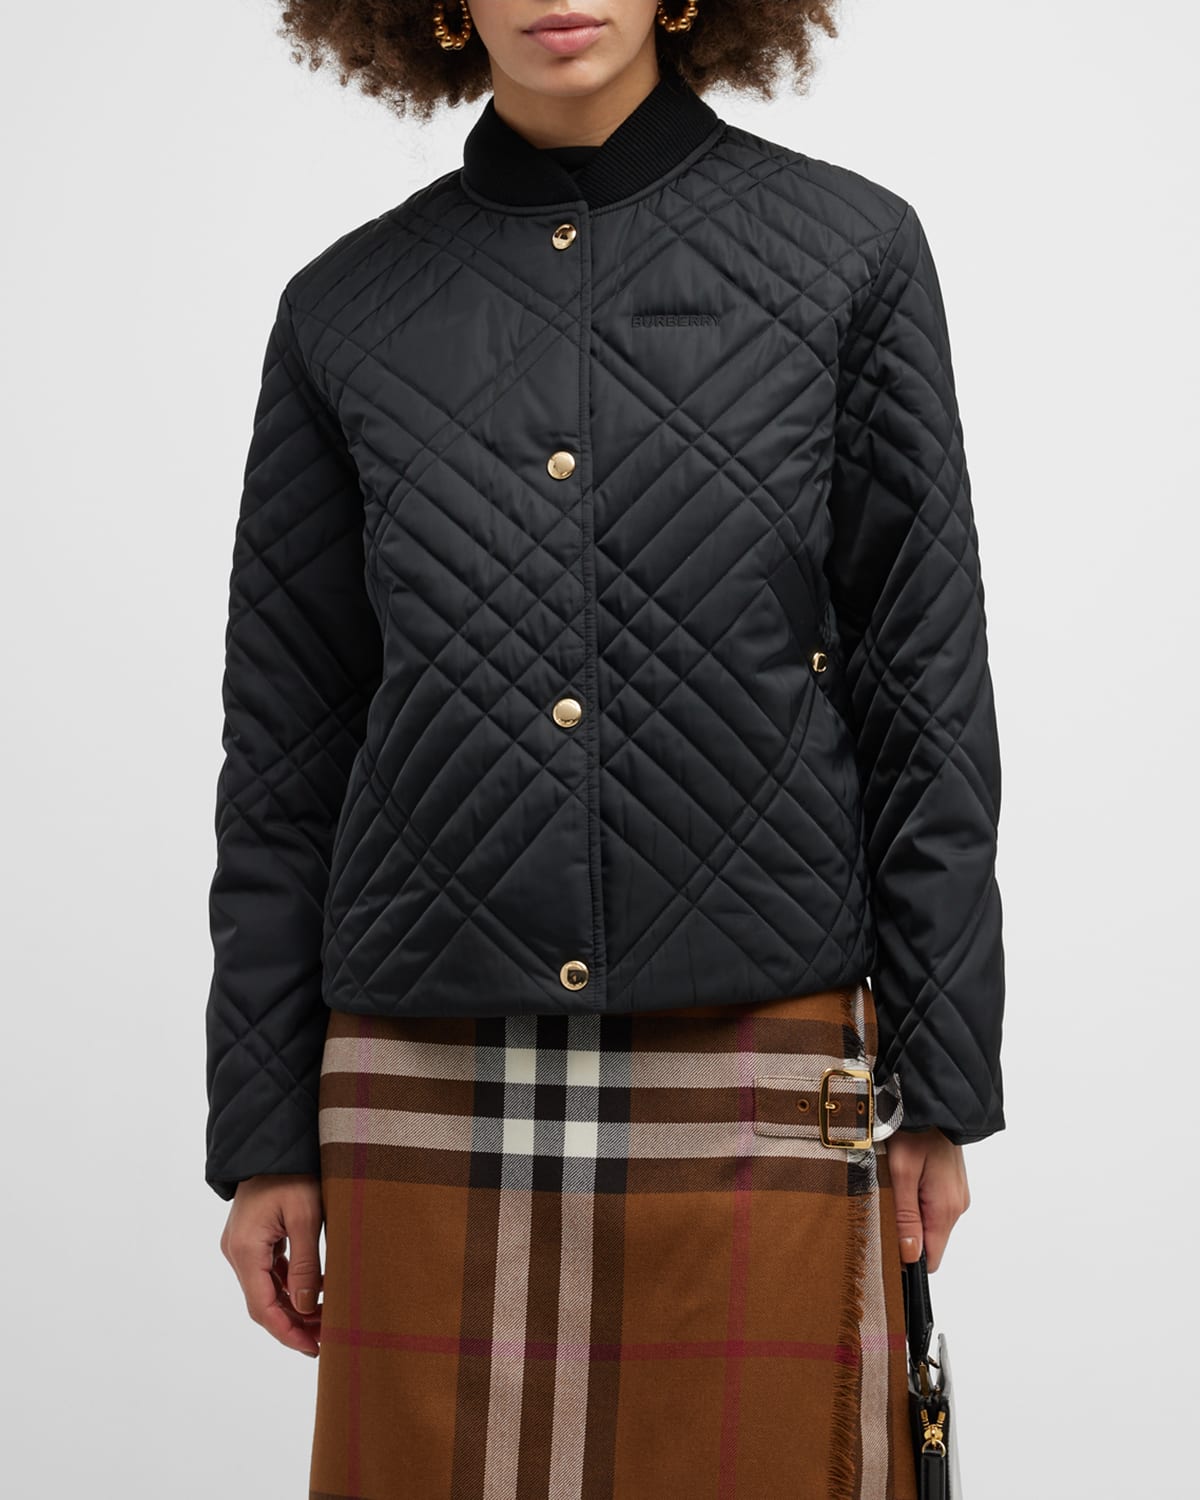 Burberry Thirlby Check Quilted Bomber Jacket | Neiman Marcus